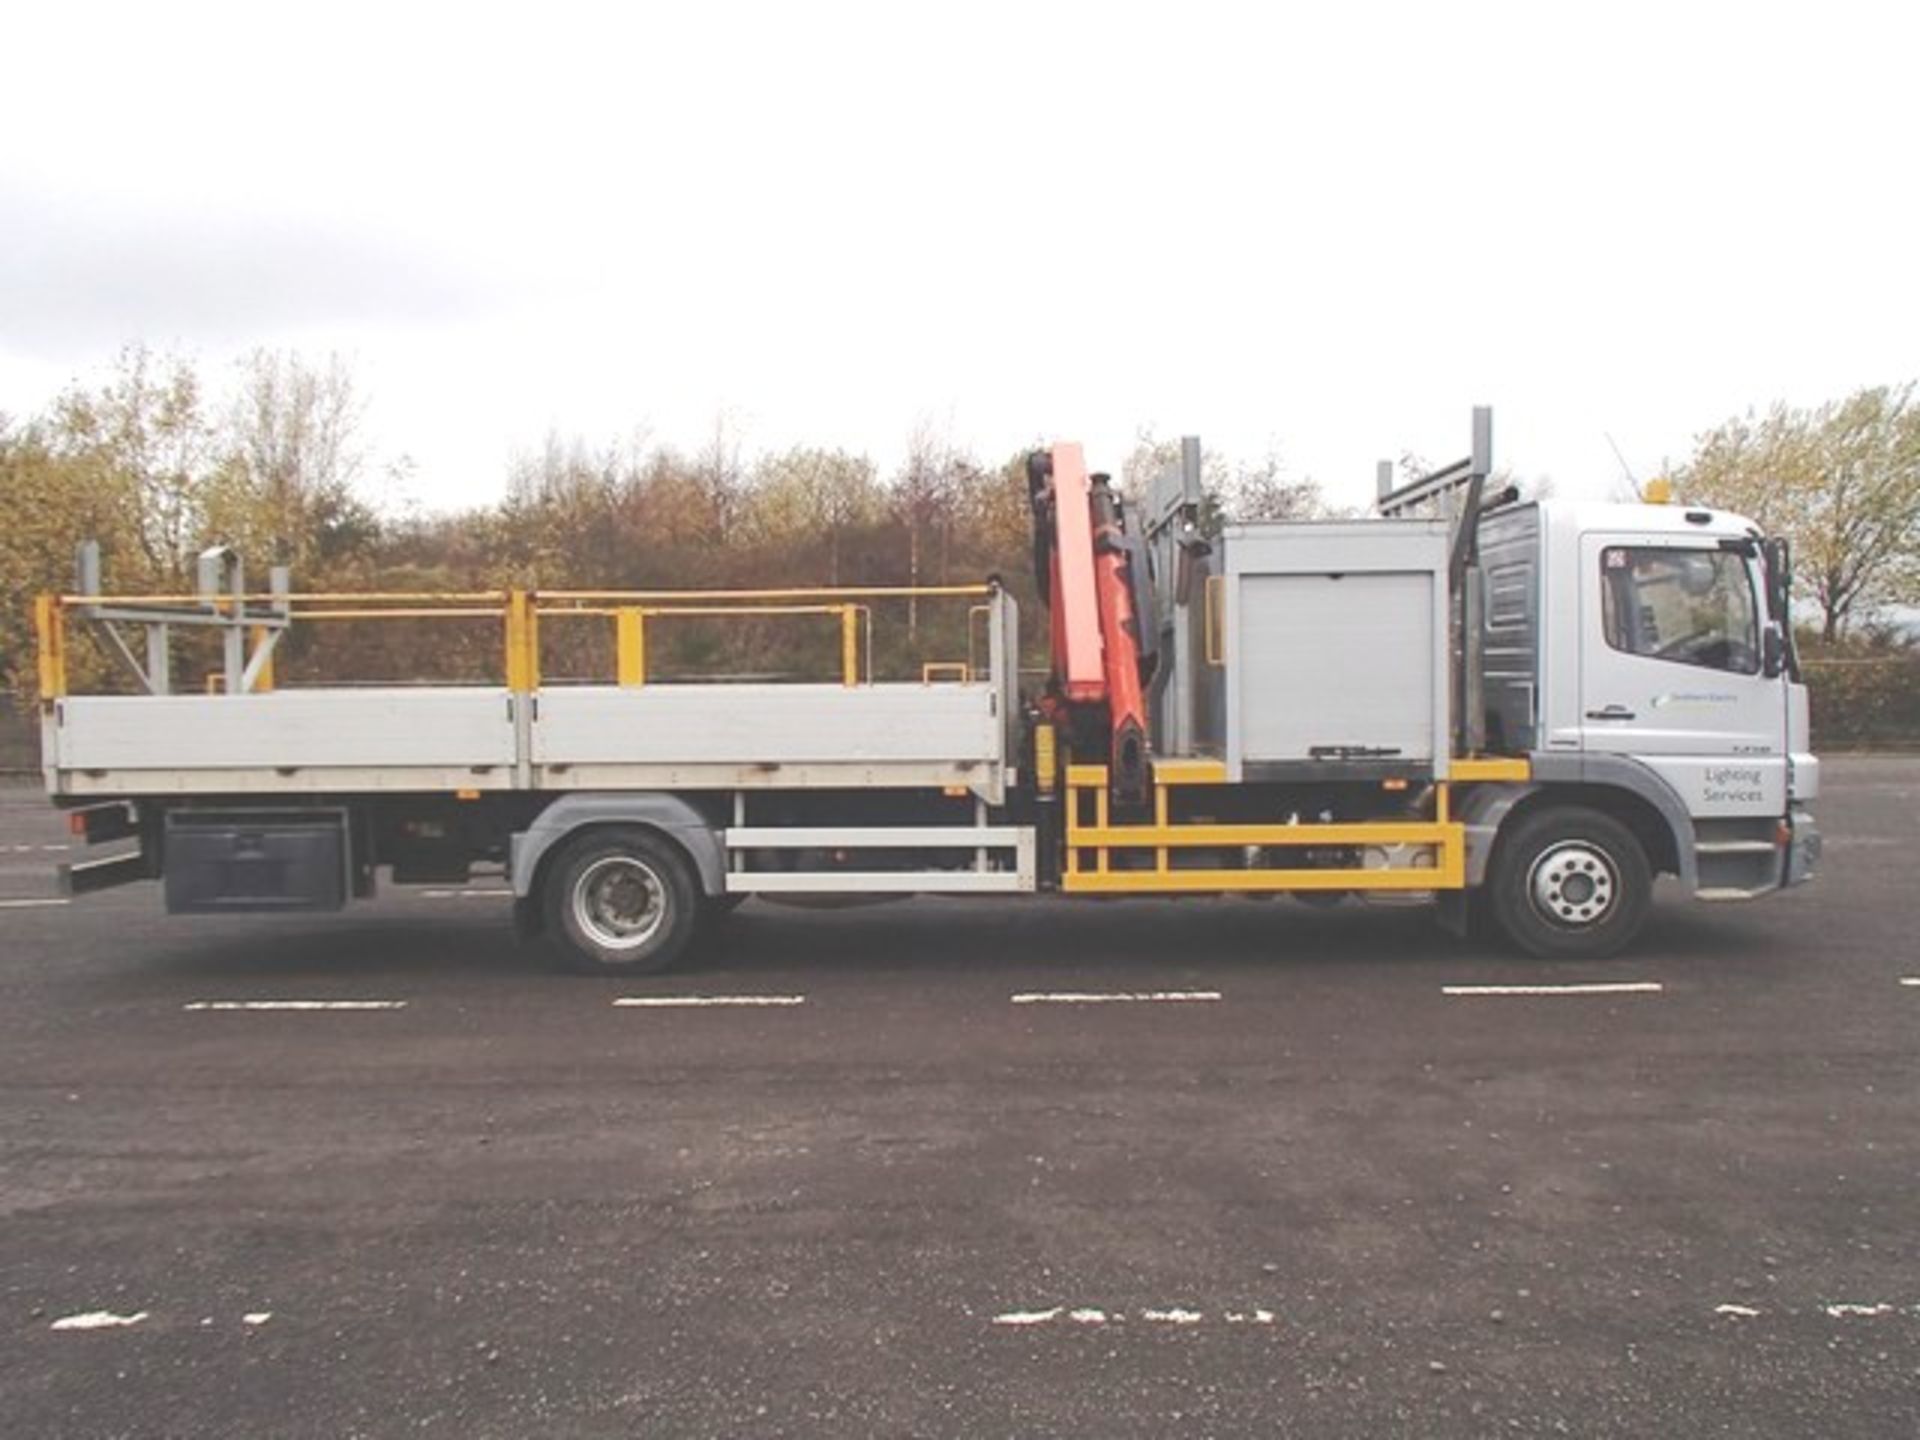 MERCEDES ATEGO - 4250cc DROPSIDE LORRY
Body: 2 Dr Truck
Color: Silver
First Reg: 29/01/2009
Doors: 2 - Image 5 of 22